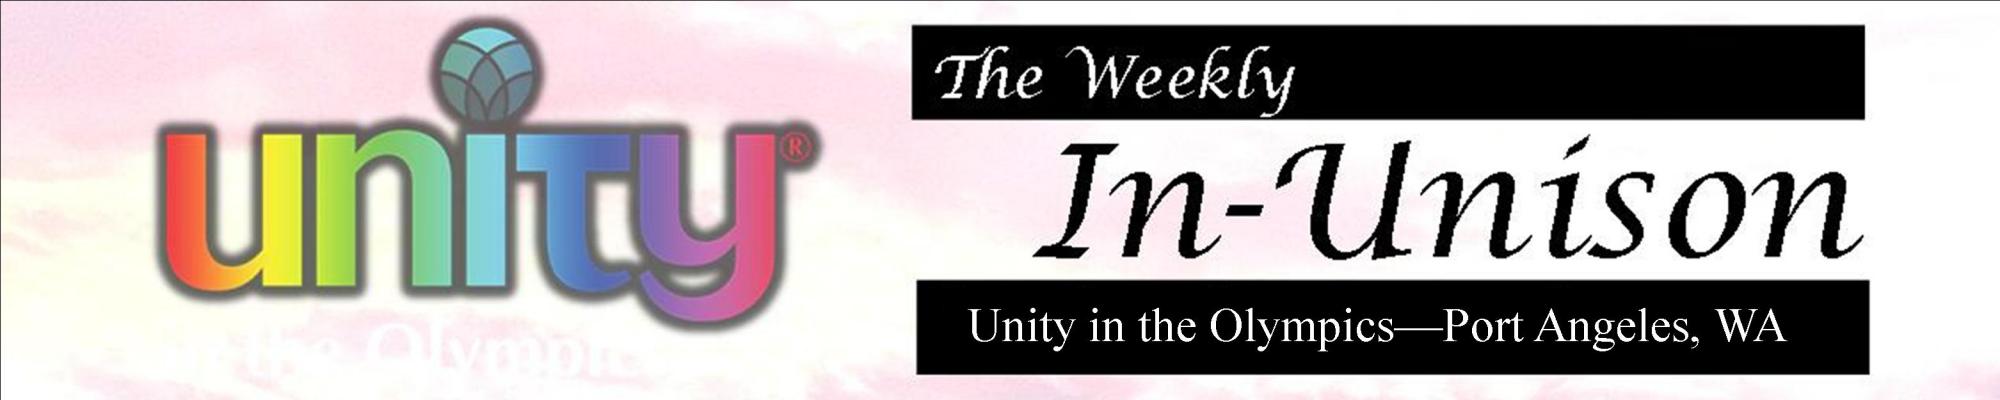 The Weekly IN-UNISON